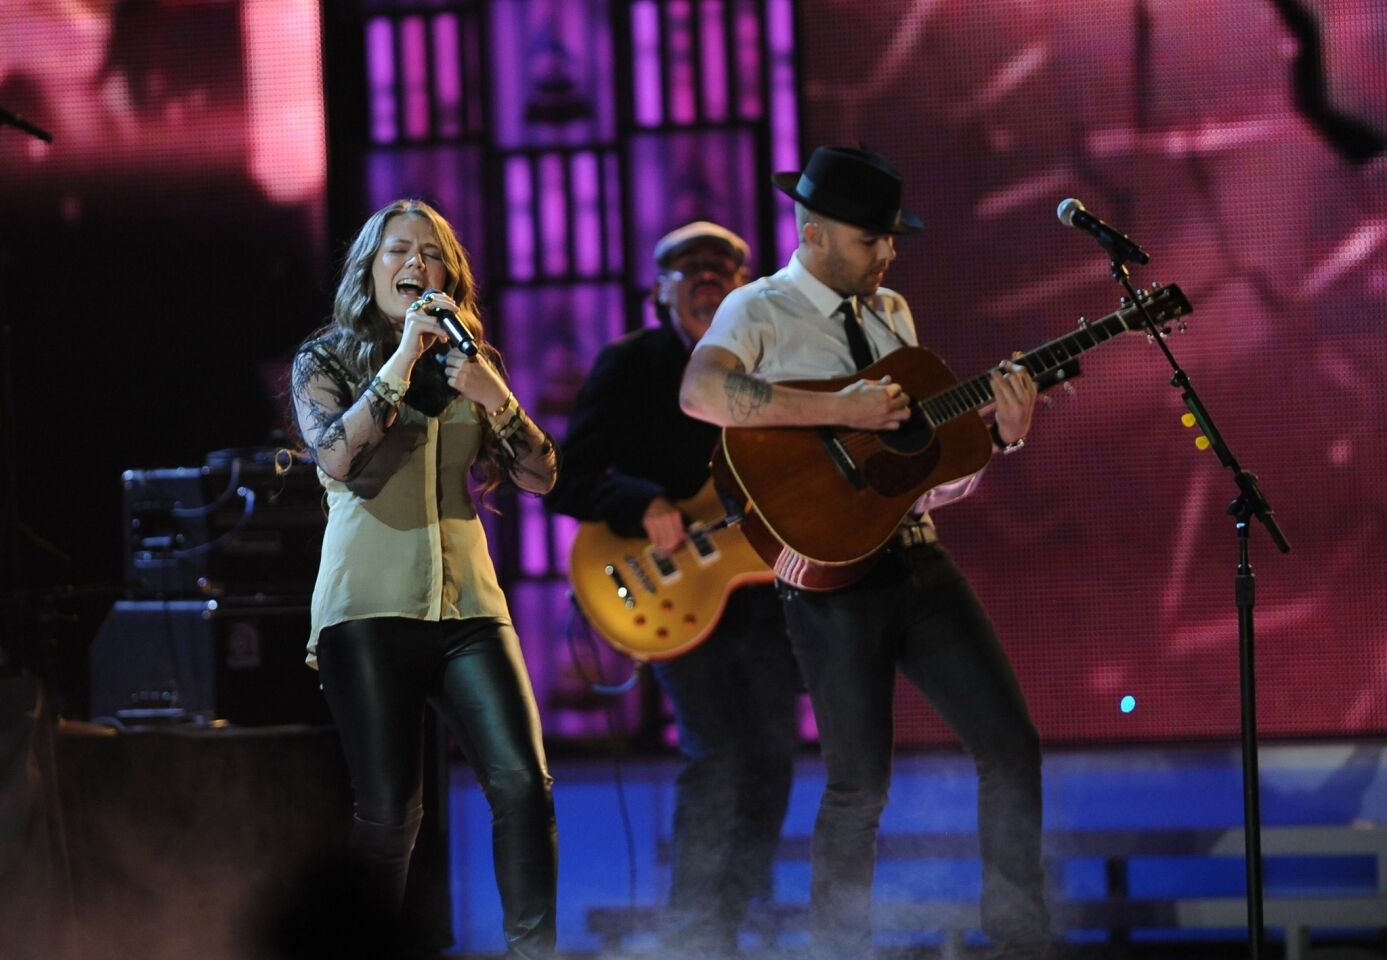 Jesse and Joy rock the stage.